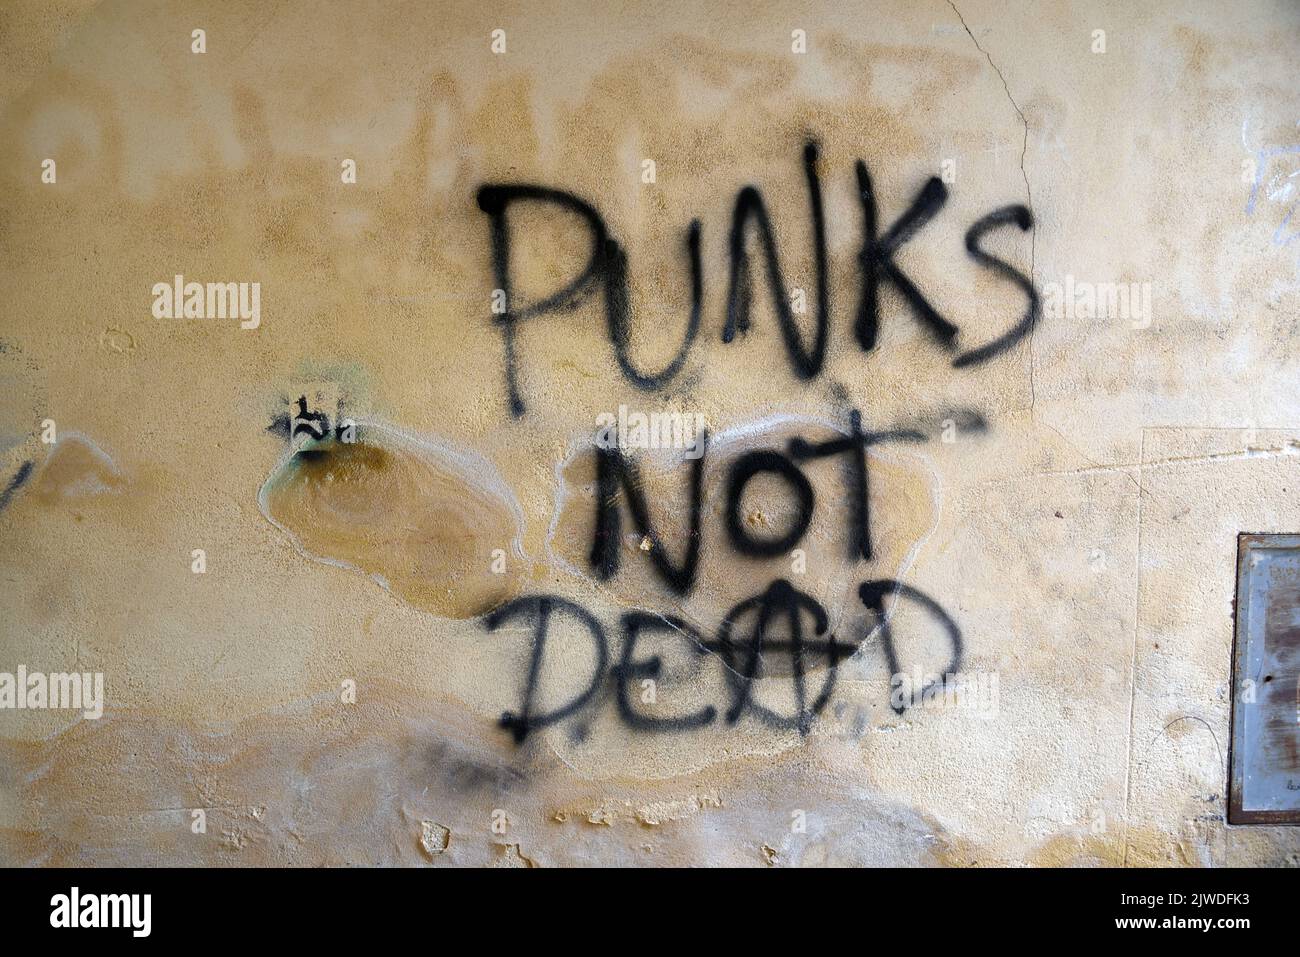 Punks Not Dead Anarchy or Anarchist Slogan or Graffiti on Old Degraded Wall or Damaged Facade Stock Photo